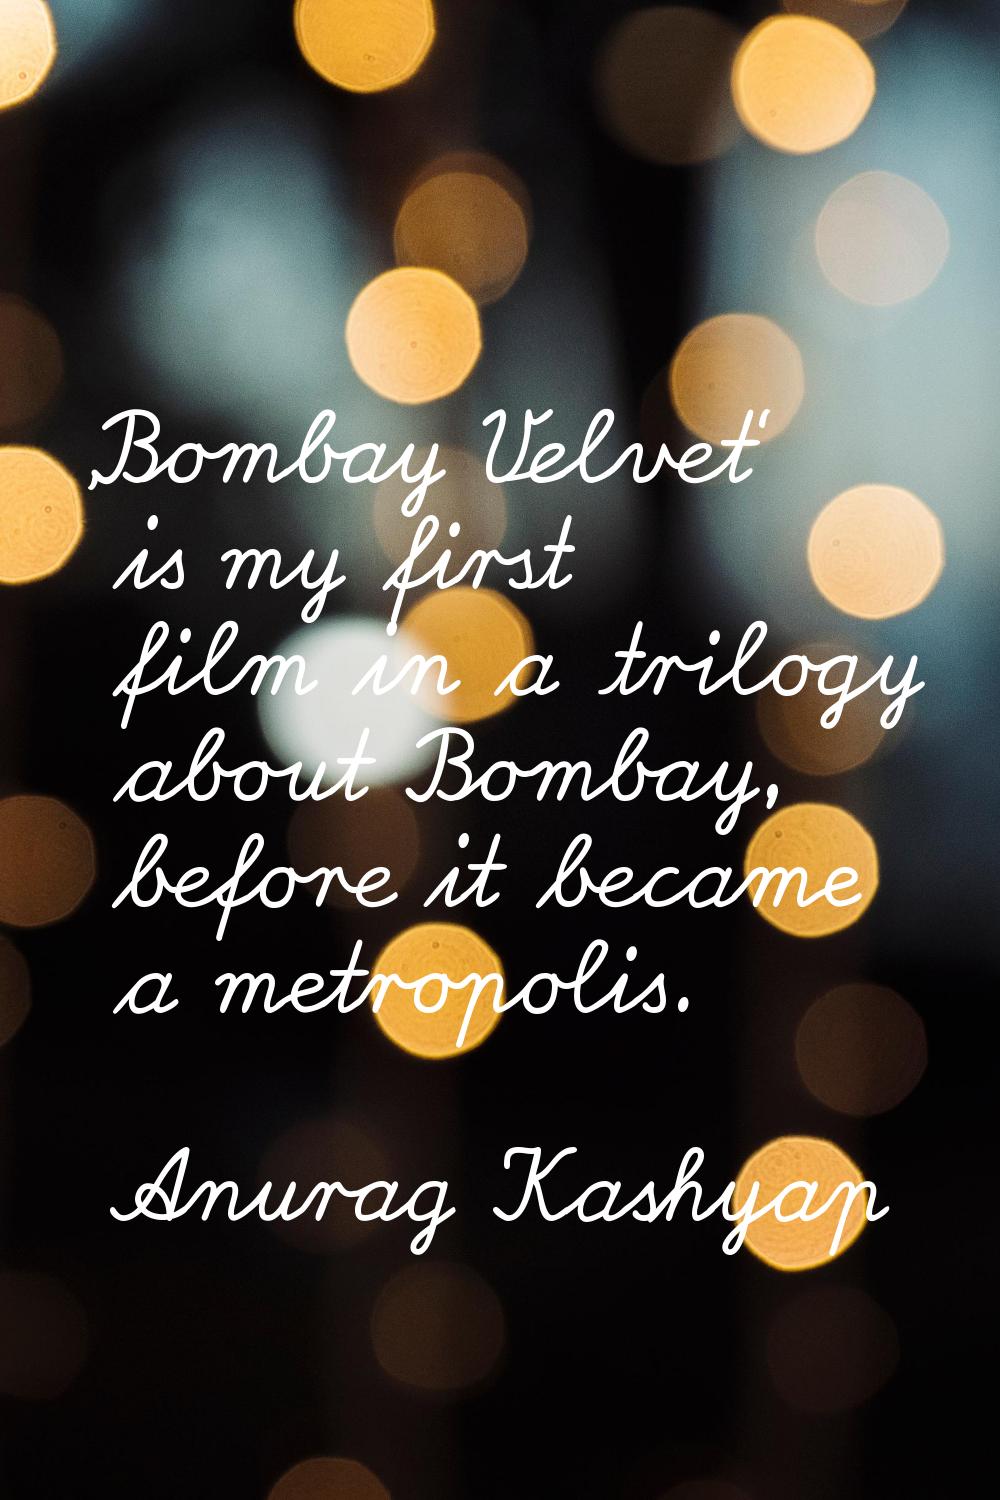 'Bombay Velvet' is my first film in a trilogy about Bombay, before it became a metropolis.